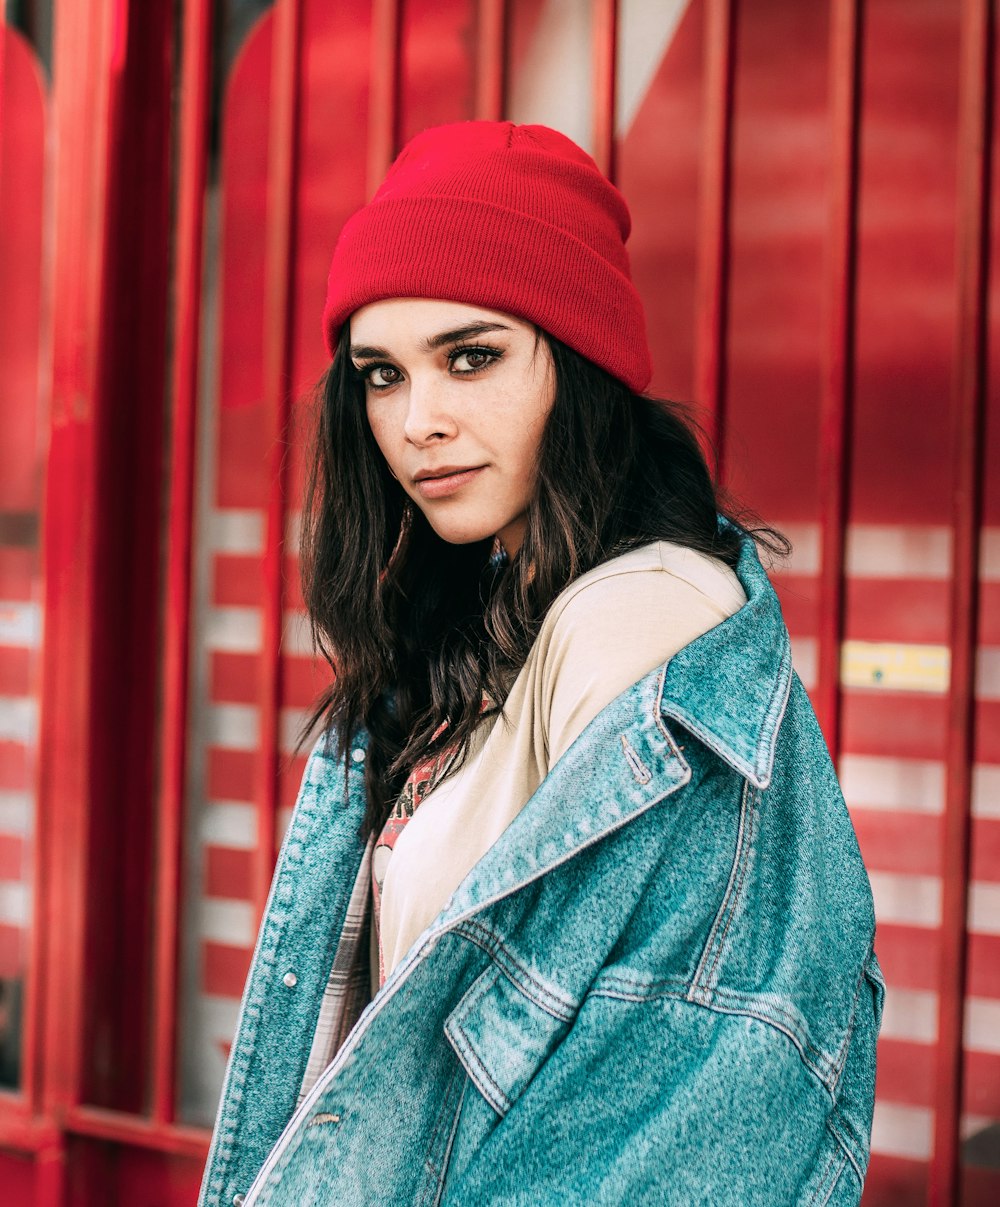 selective focus photography of woman wearing red knit cap